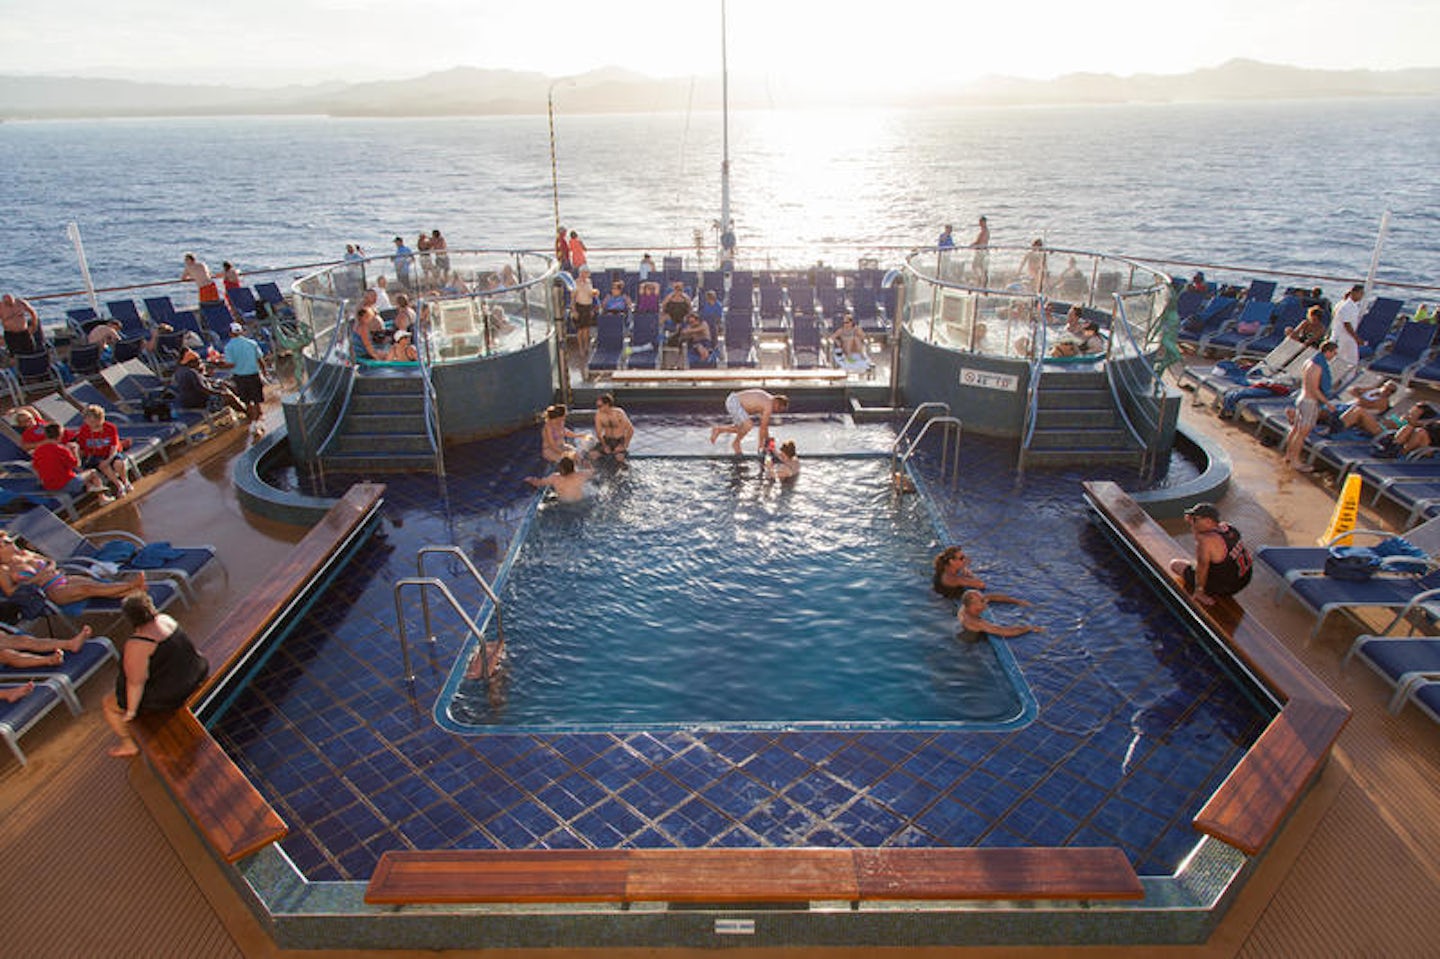 The Pools and Hot Tubs on Carnival Splendor